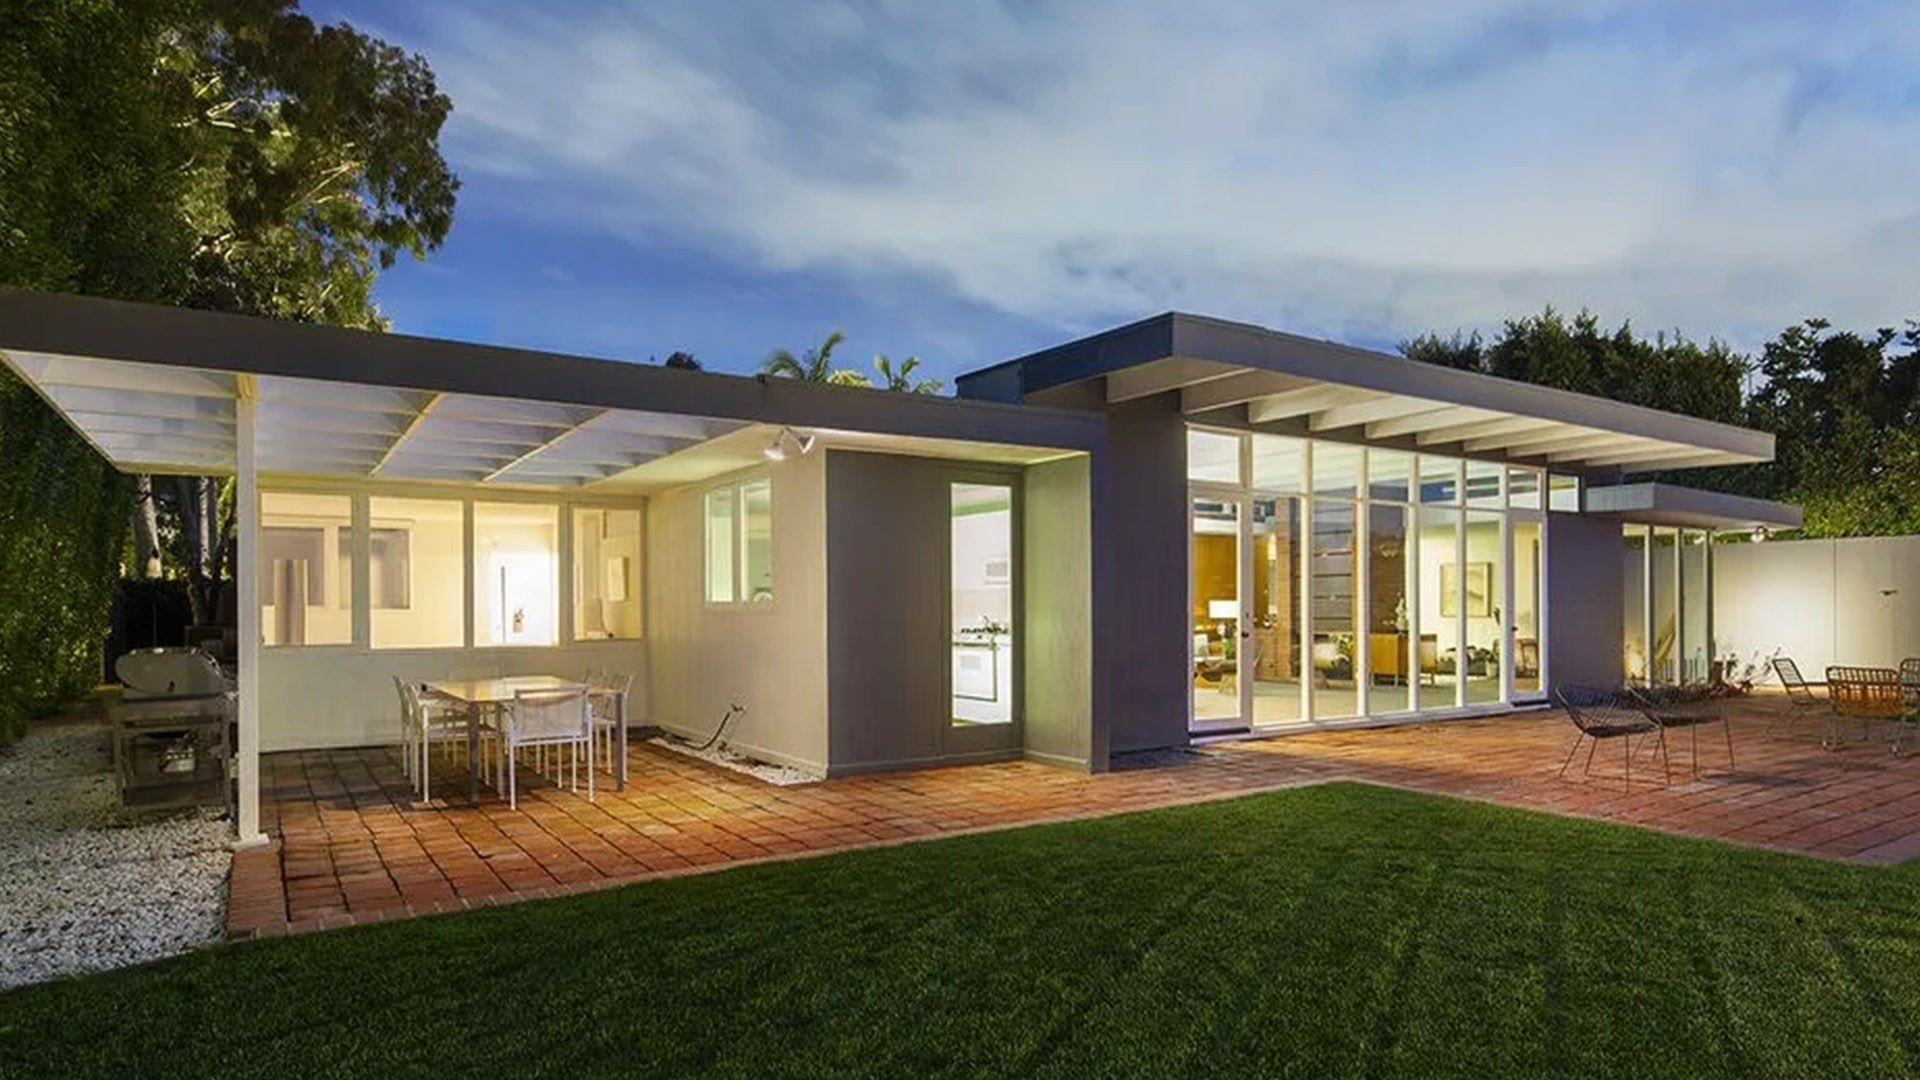 Rare Case Study House With Ocean Views in Pacific Palisades Available for $8.9M